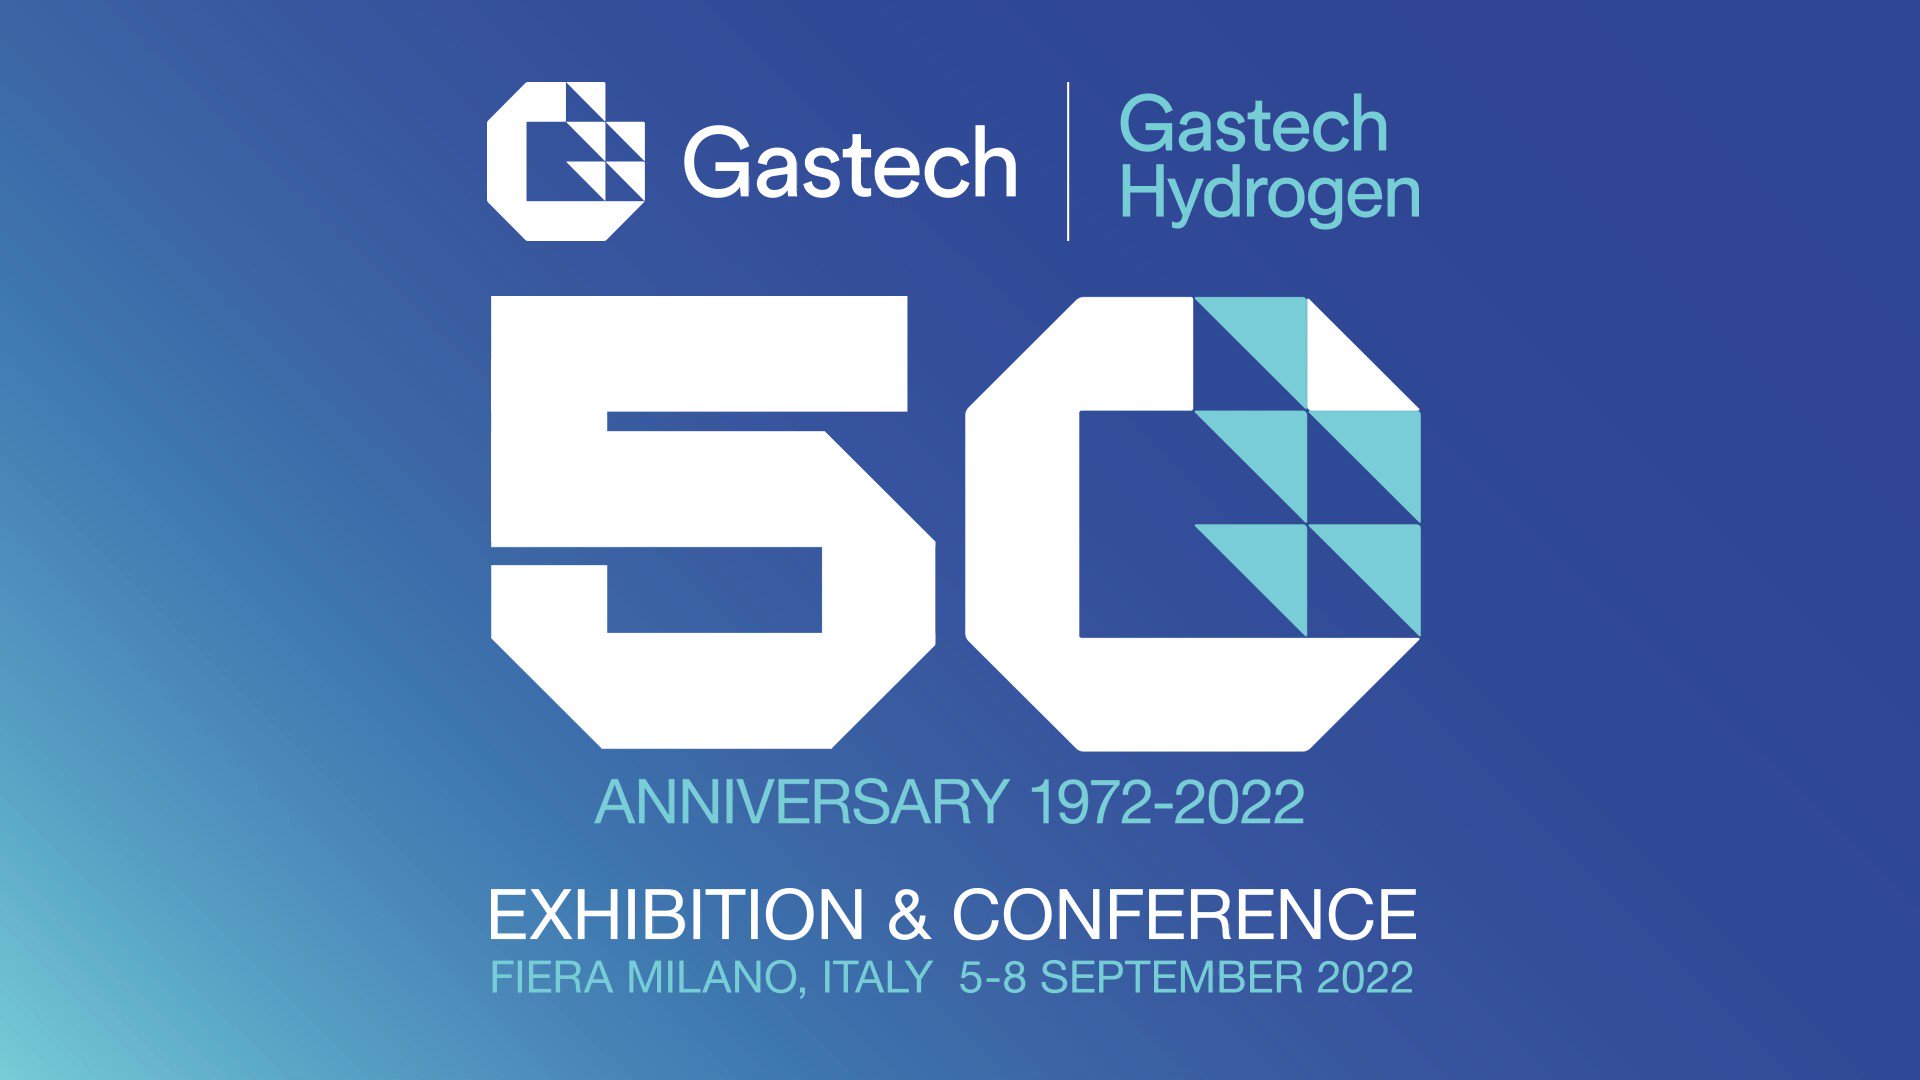 Gastech Exhibition & Conference 